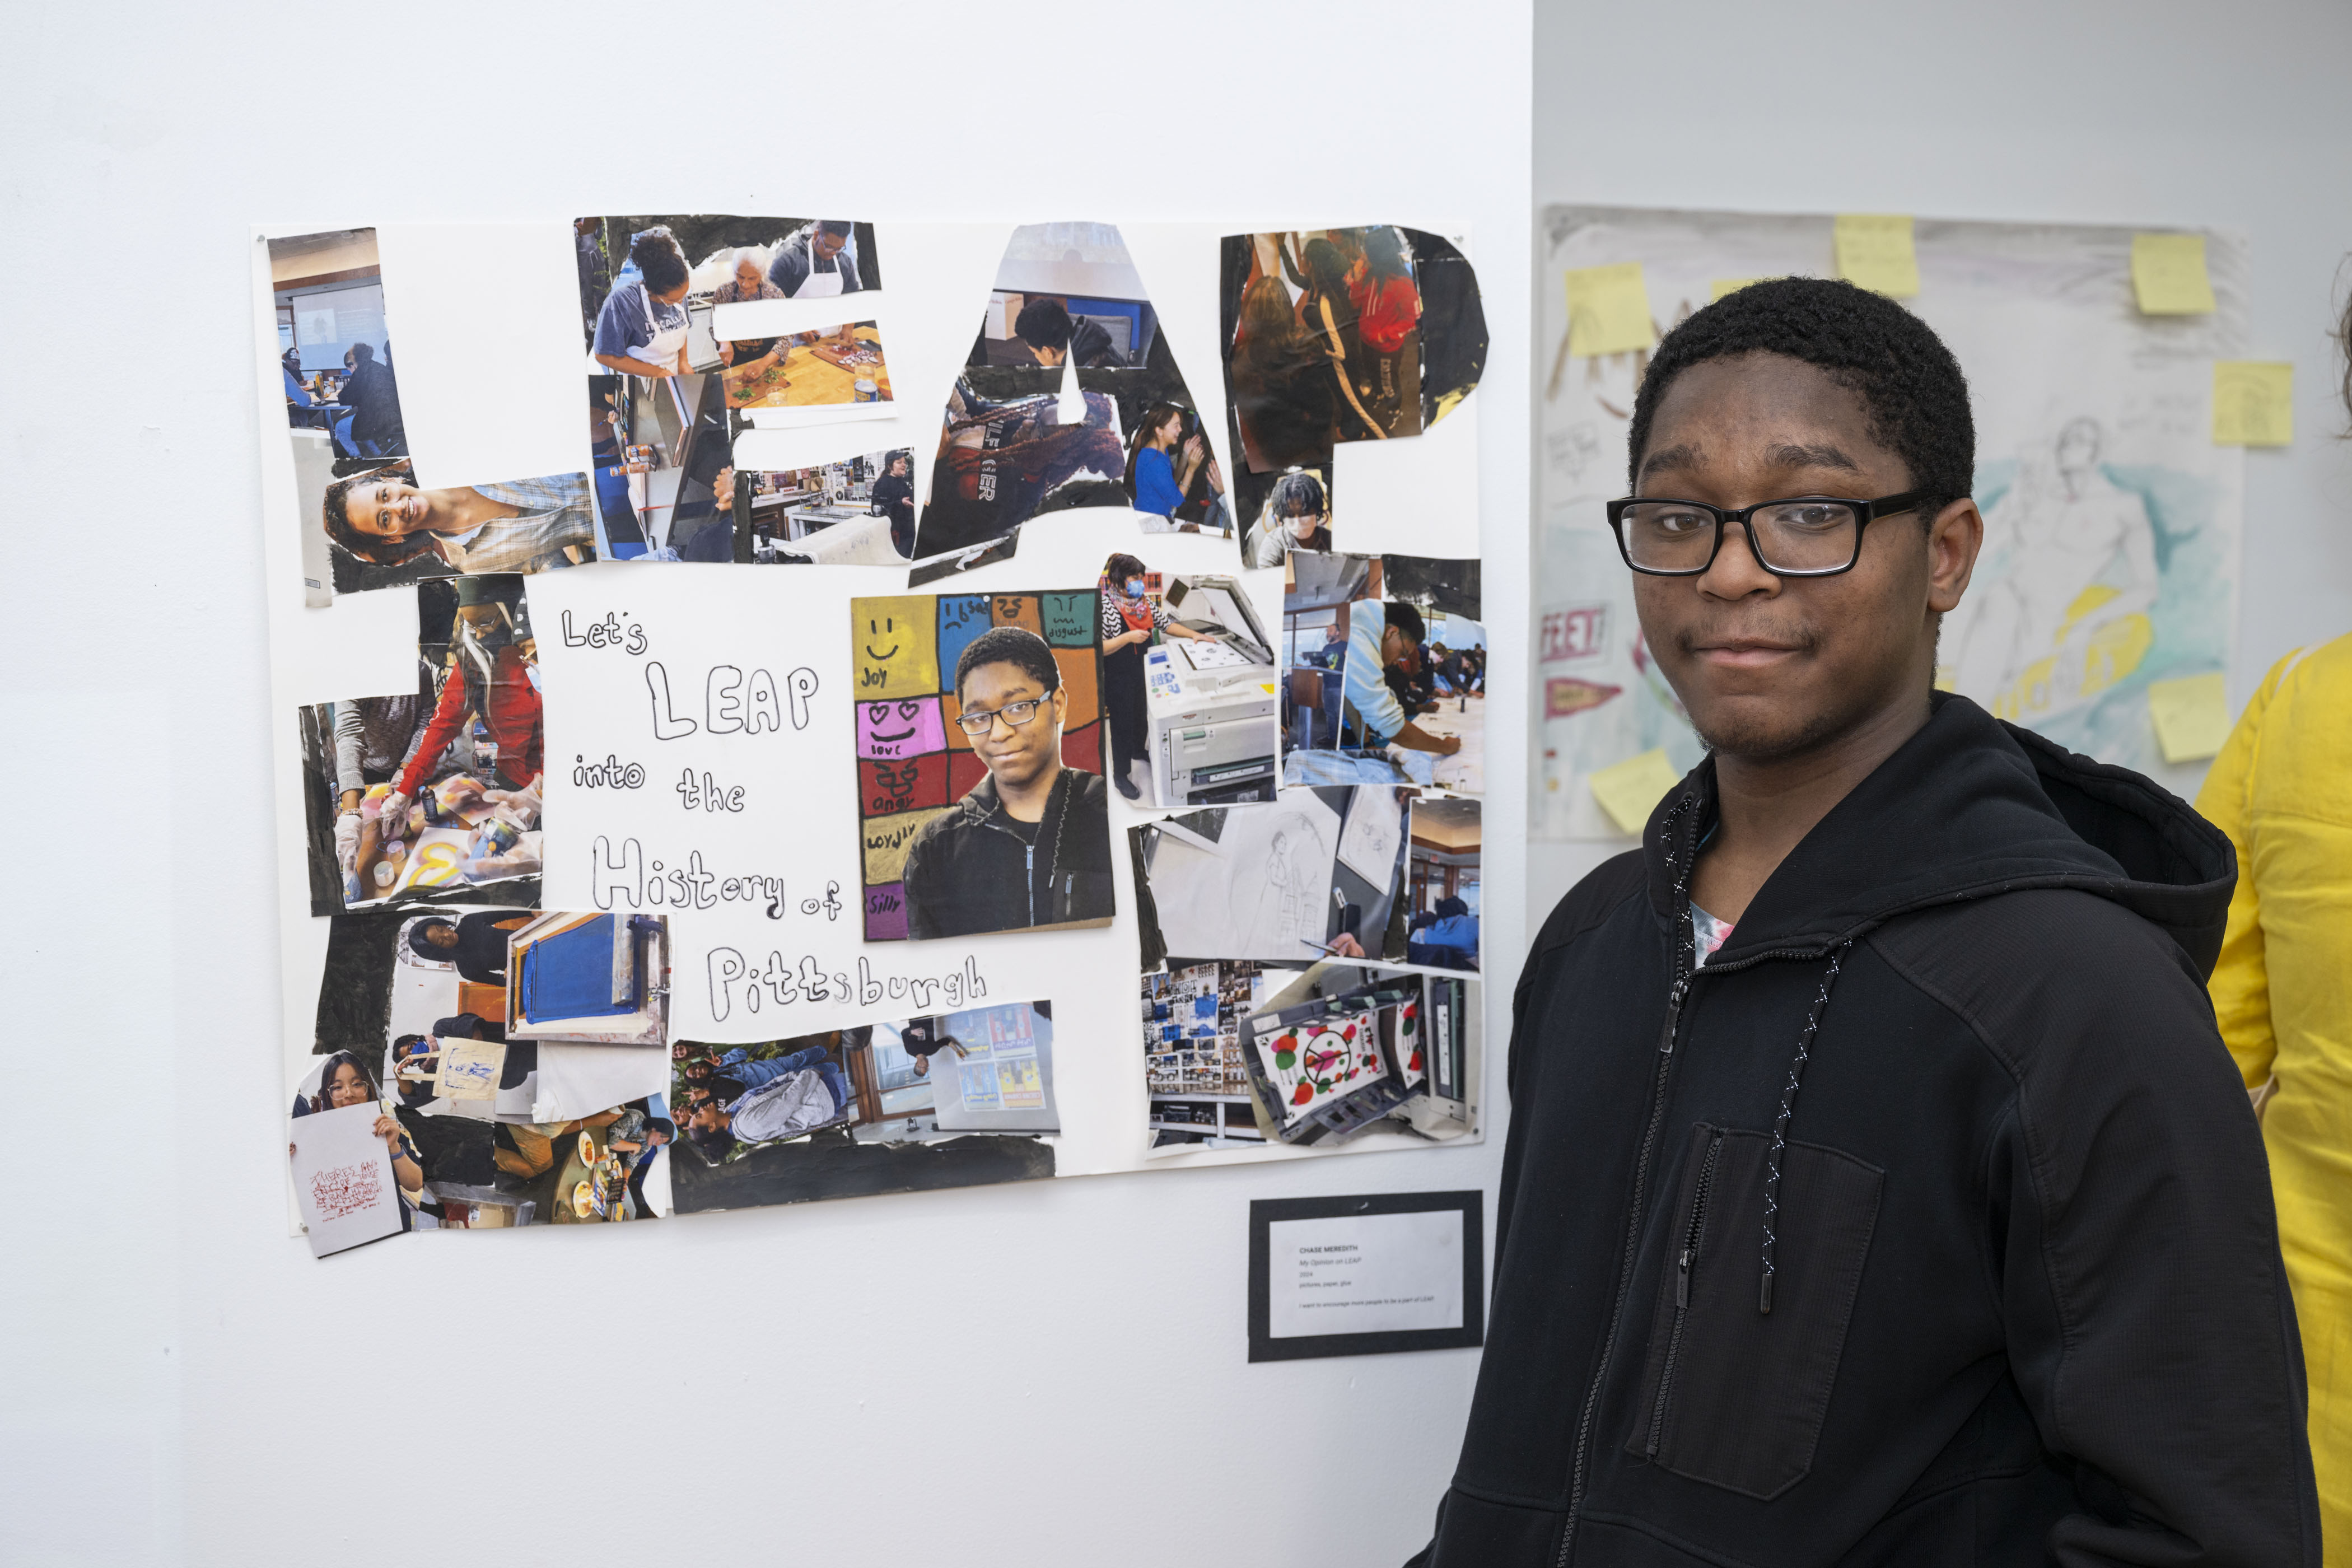 LEAP student, Chase, standing next to a collage he created